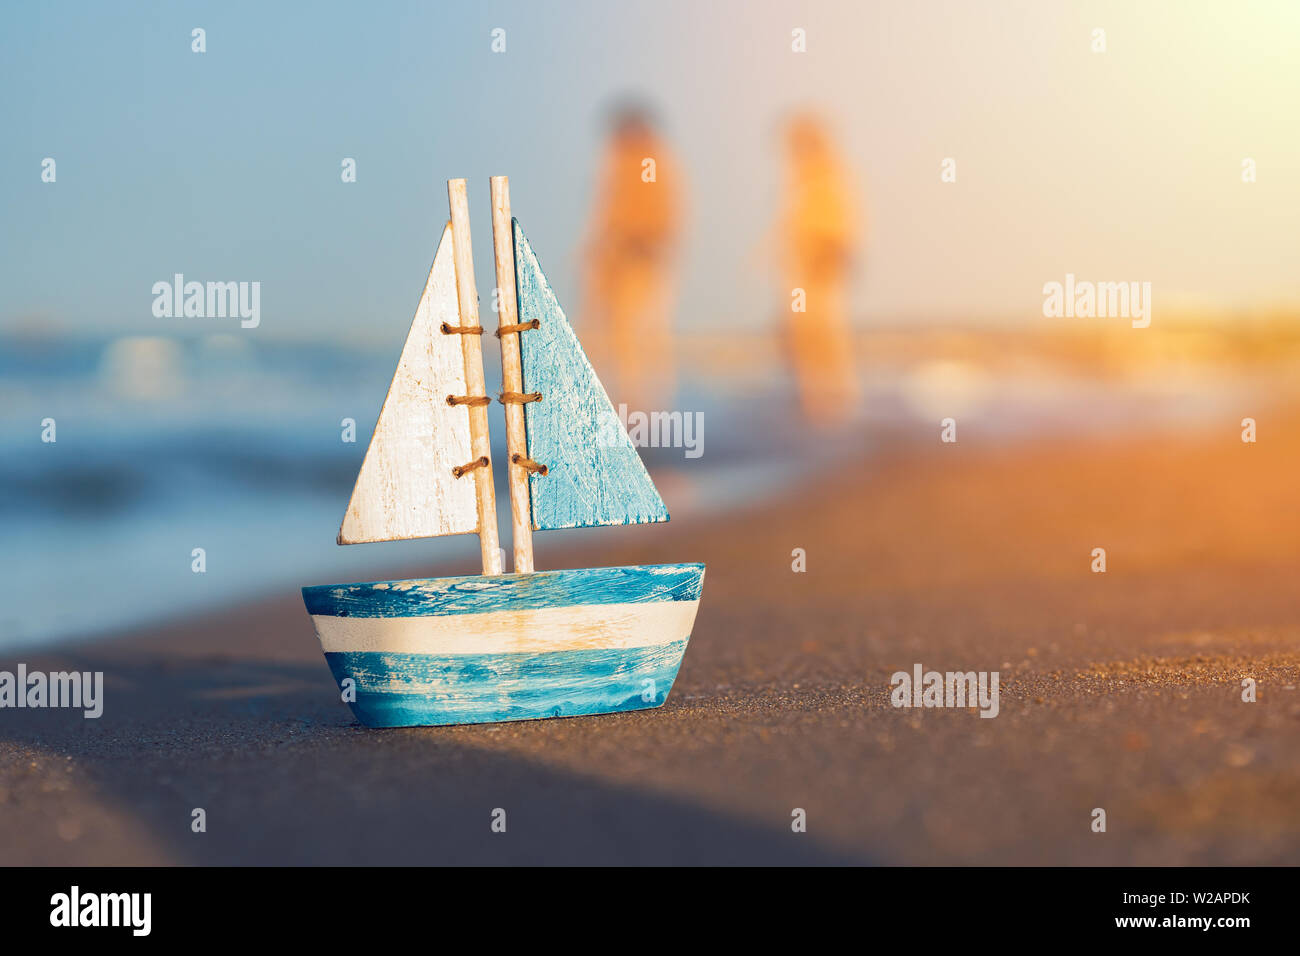 wooden toy sailboat standing on sand near the seashore in summer. Blurred people and toy sailboat at the beach. Vacation and leisure concept concept. Stock Photo